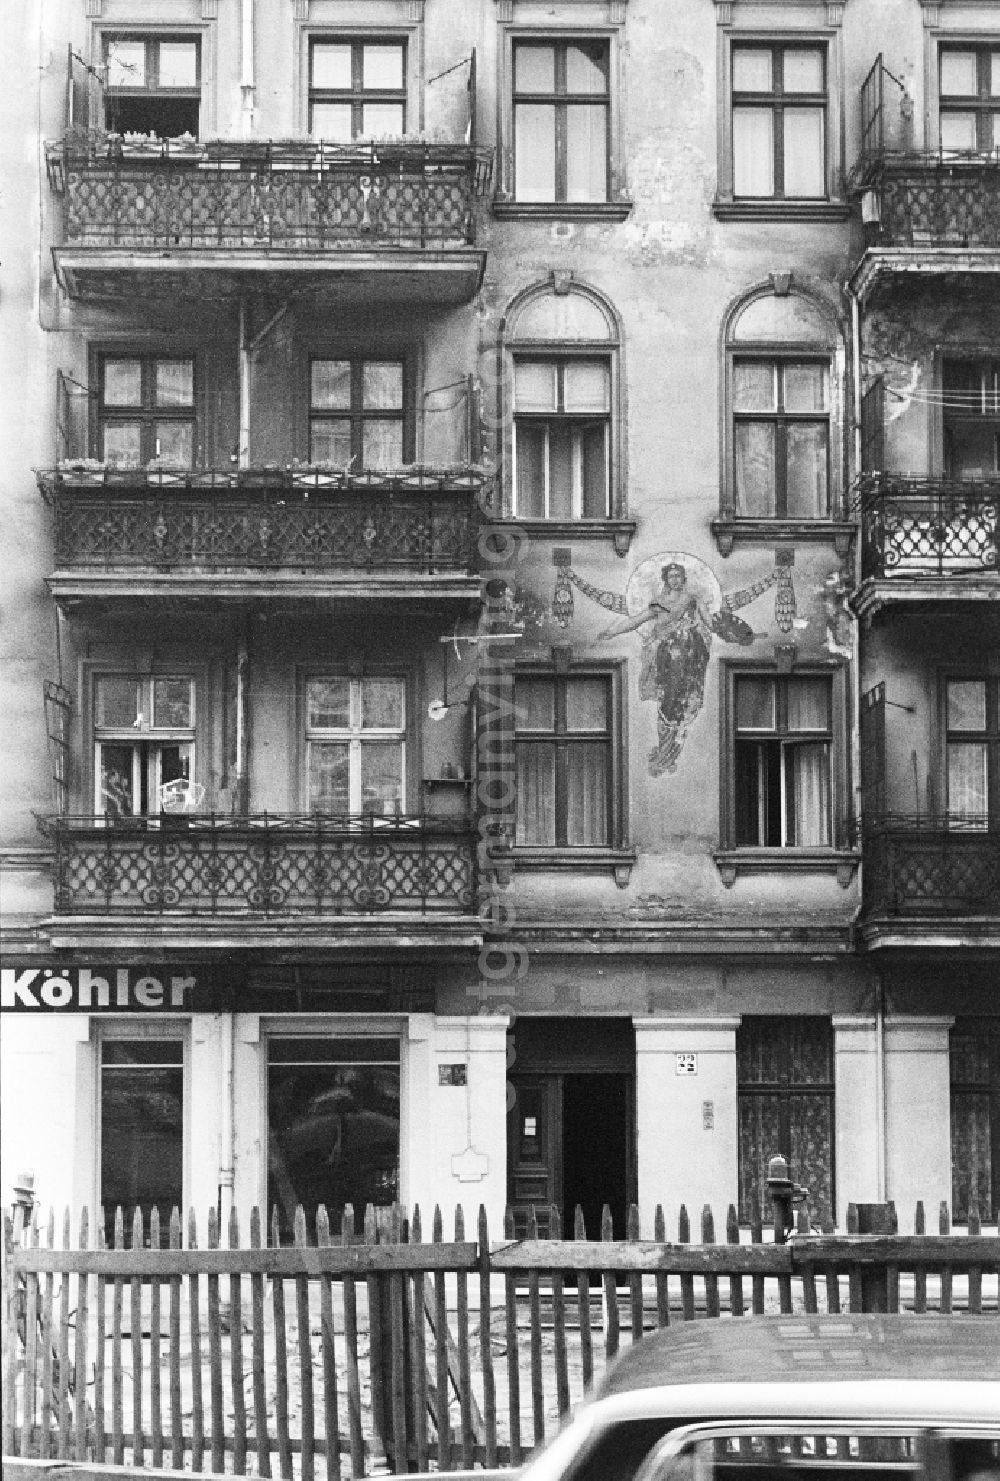 GDR photo archive: Berlin - Old building facade with balconies and art painting in Berlin, the former capital of the GDR, German democratic republic